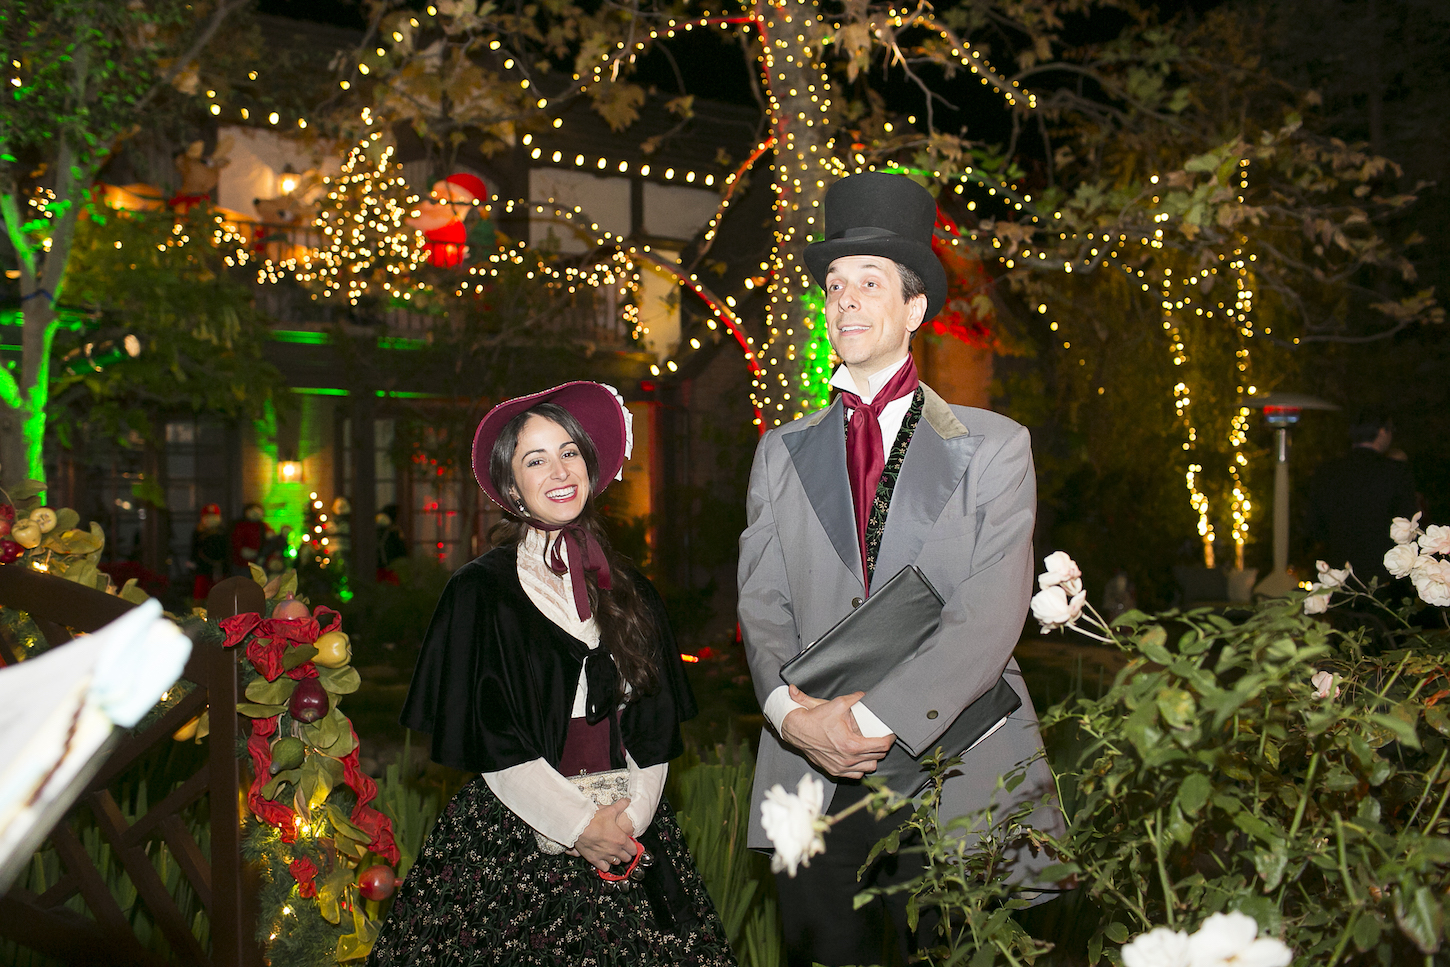 Outdoor Christmas Scene with Carolers